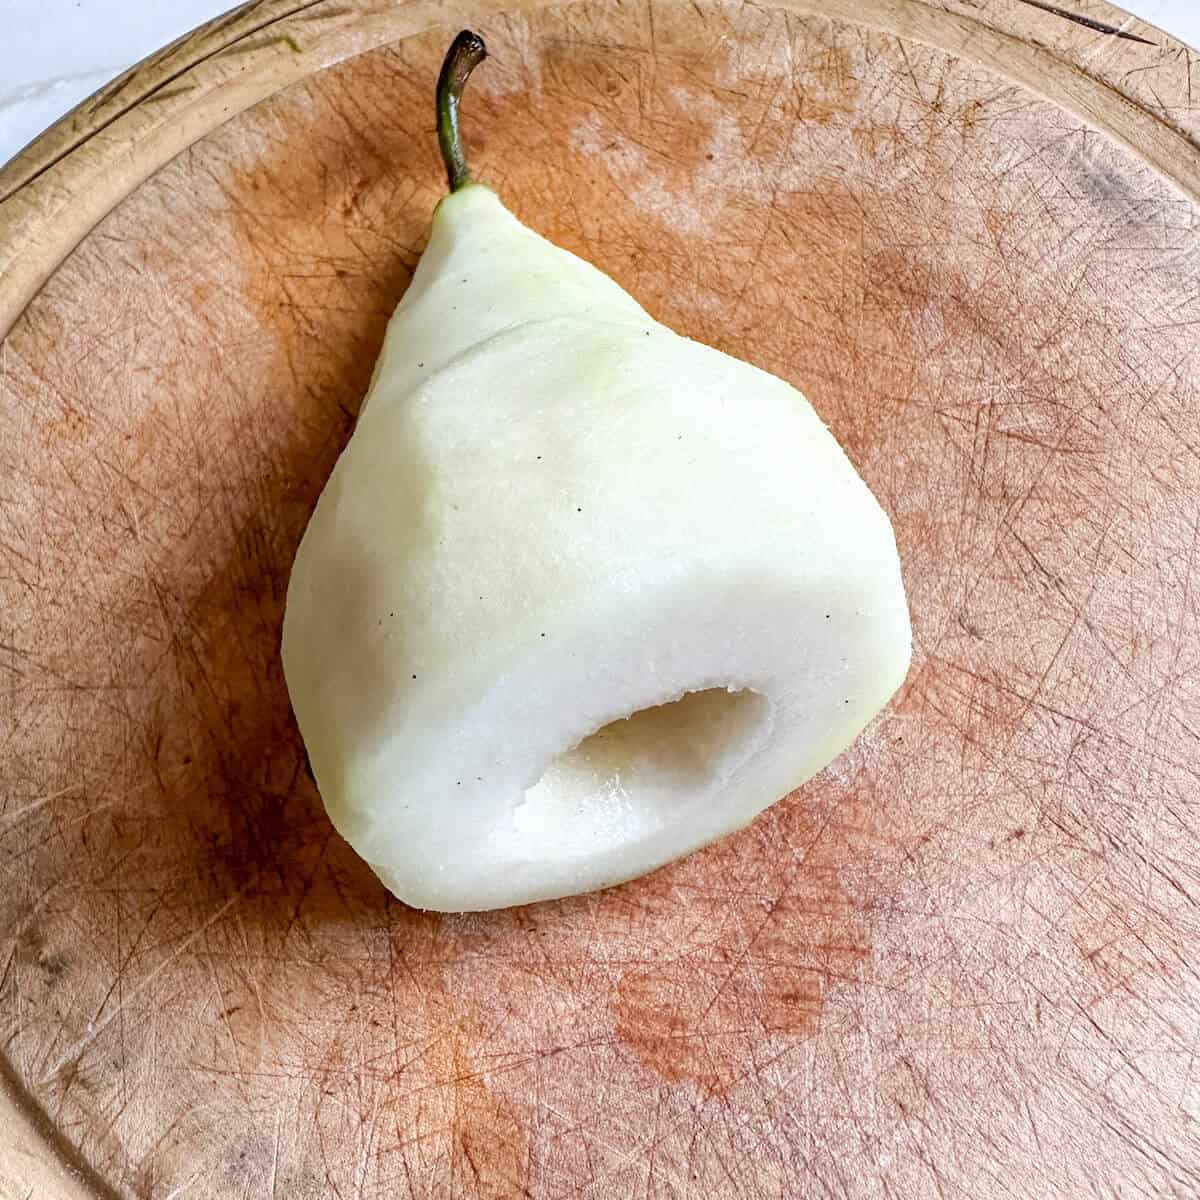 A peeled and cored pear on a chopping board.